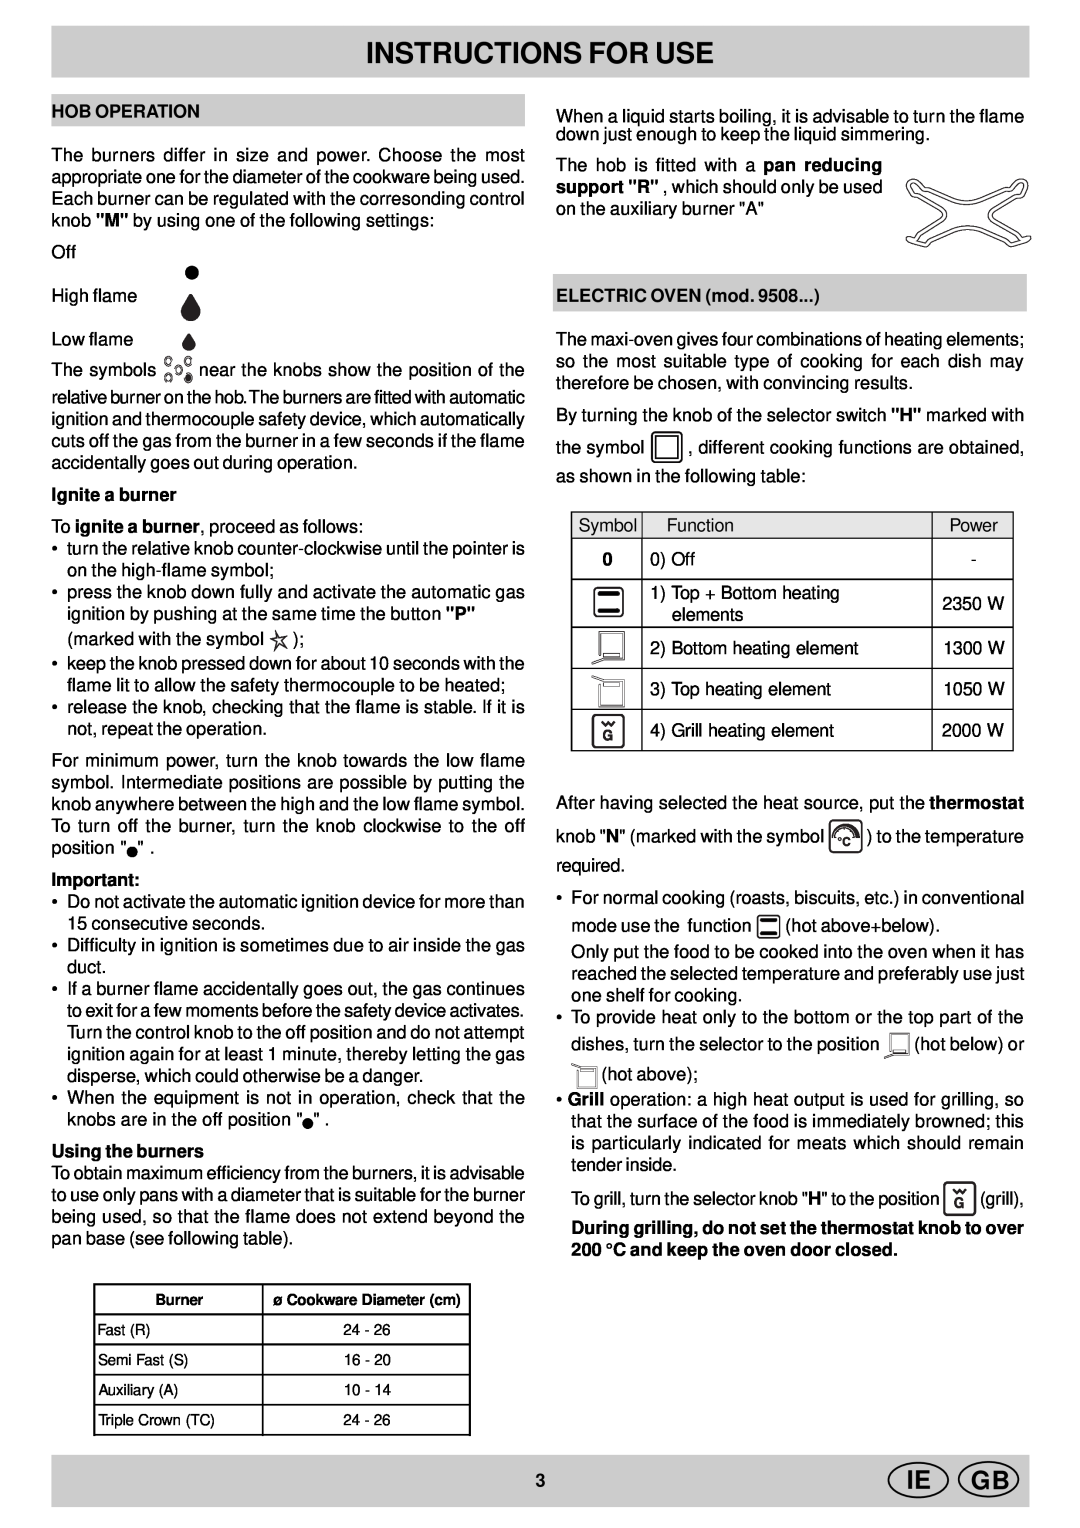 Indesit KP 9508 E (X)/G Instructions For Use, Hob Operation, Ignite a burner, Using the burners, ELECTRIC OVEN mod, Ie Gb 